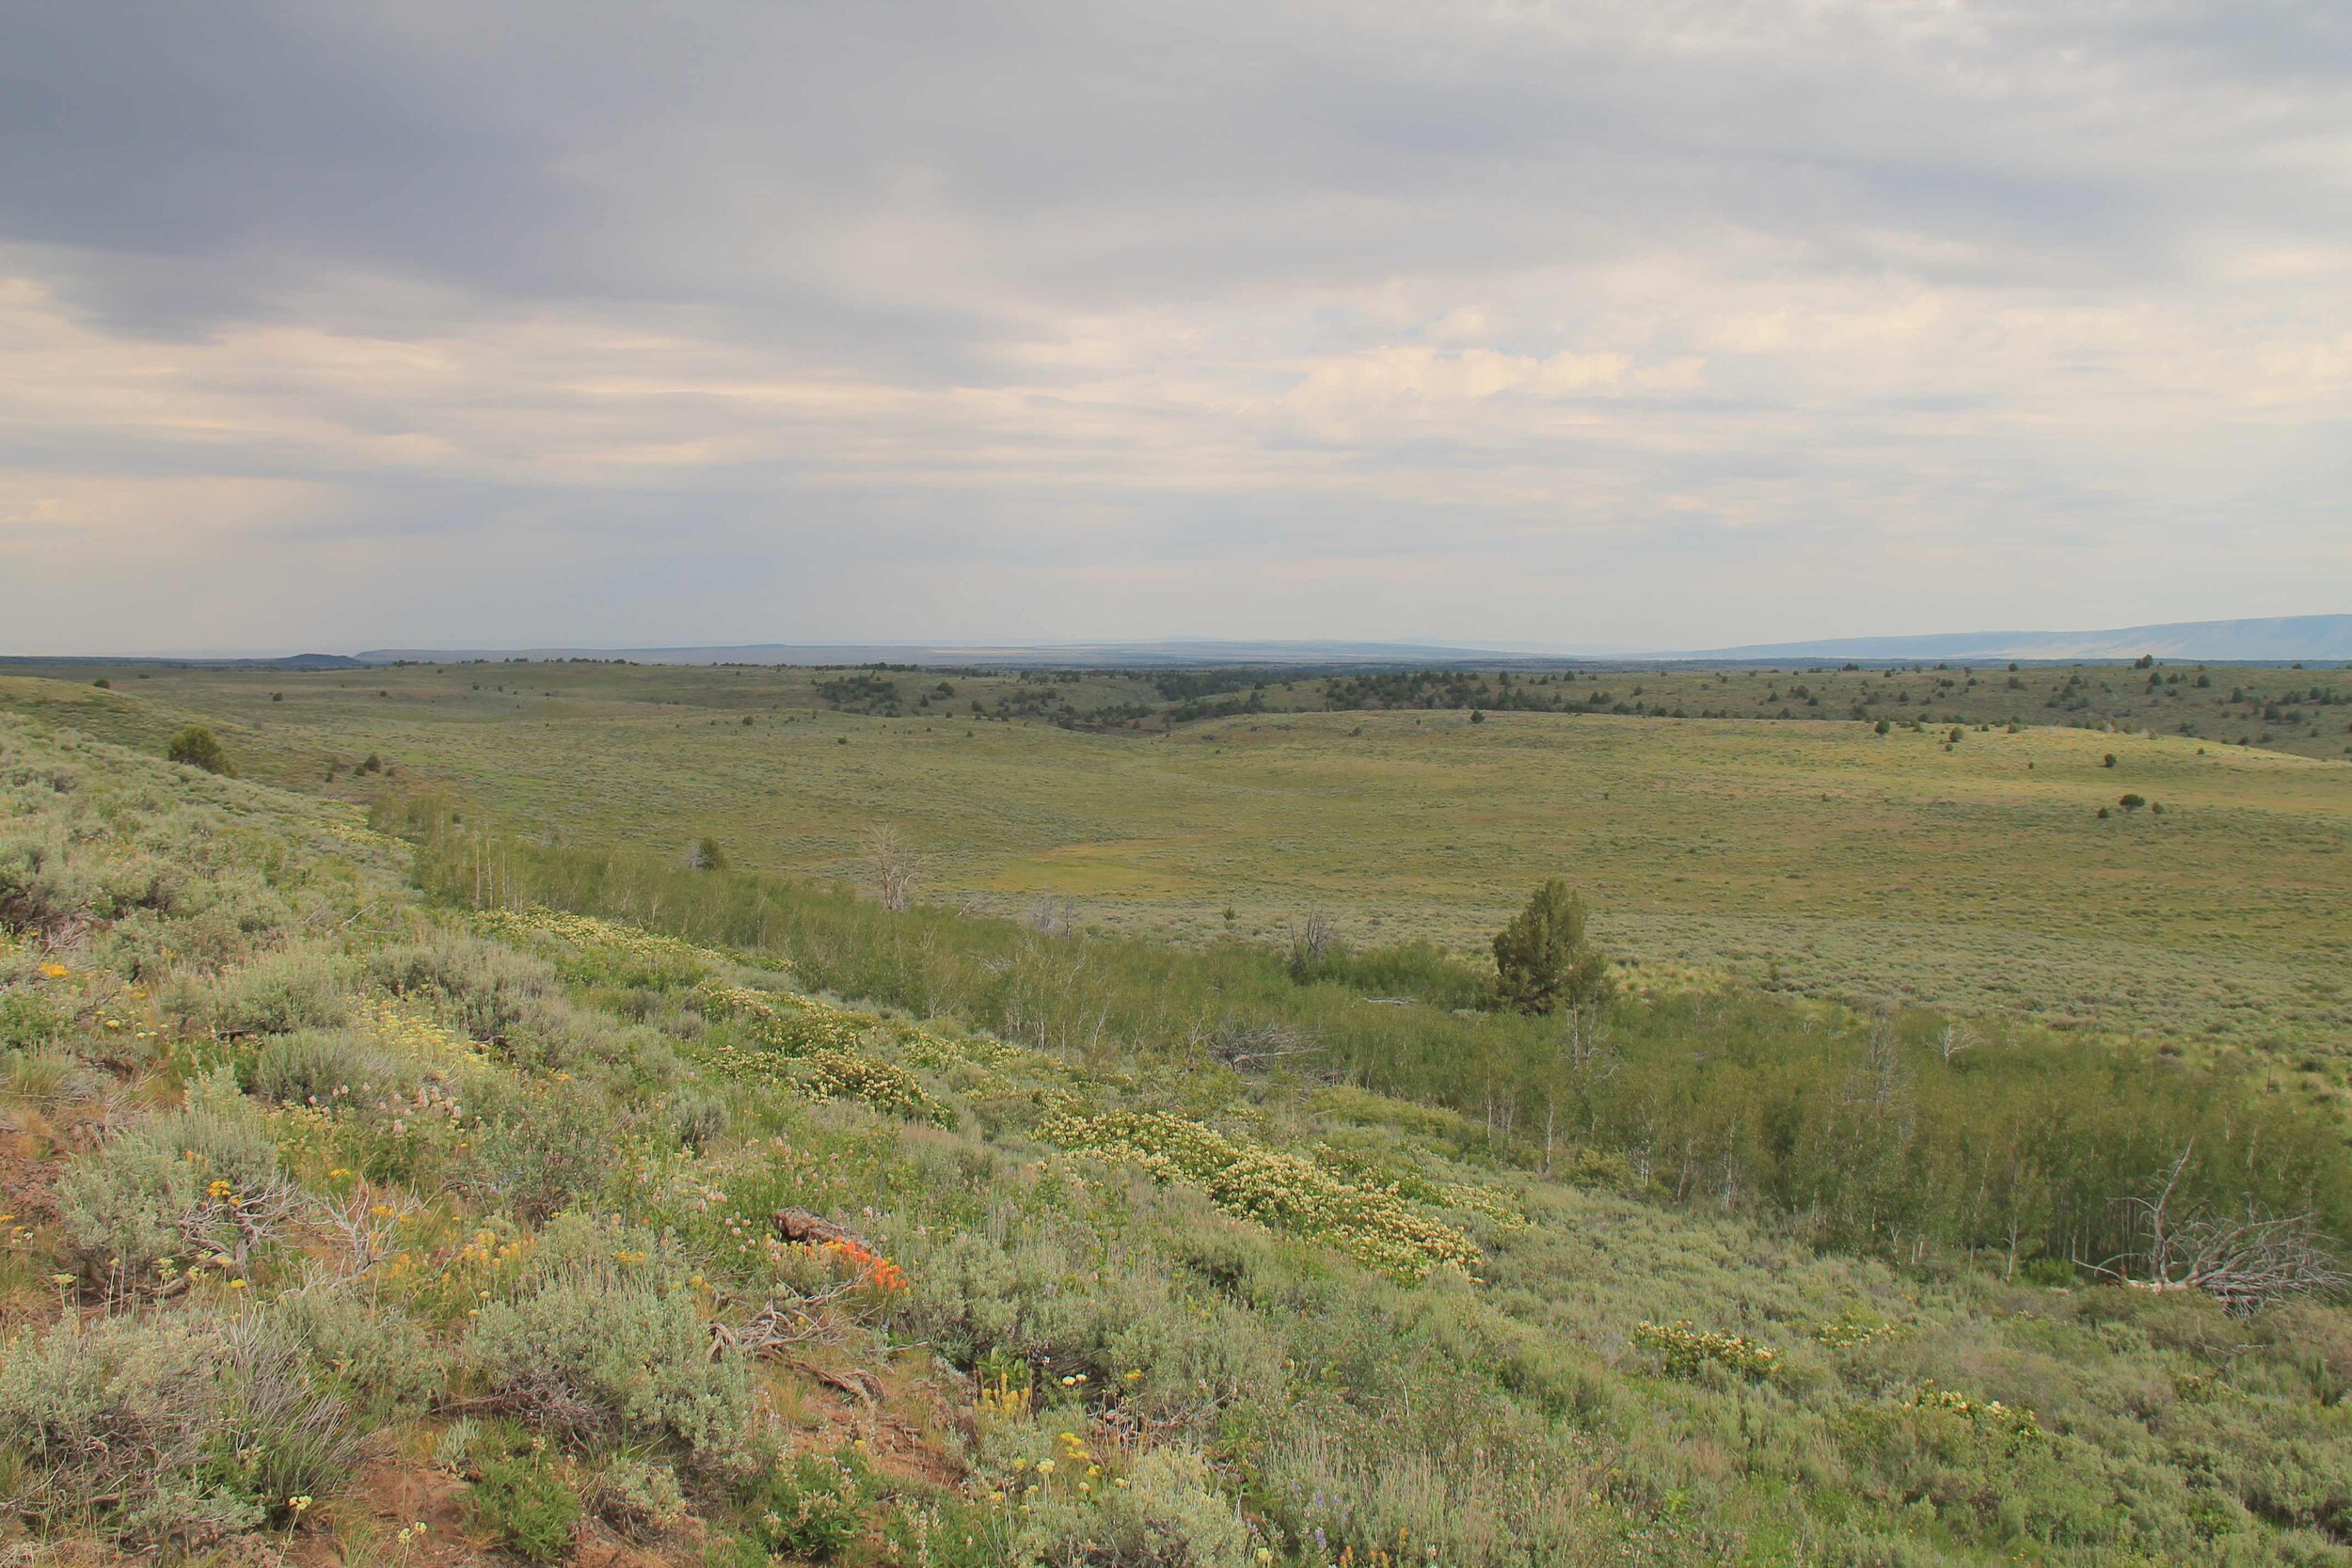  View of grasslands from a hilltop with rolling hills in the distance.  